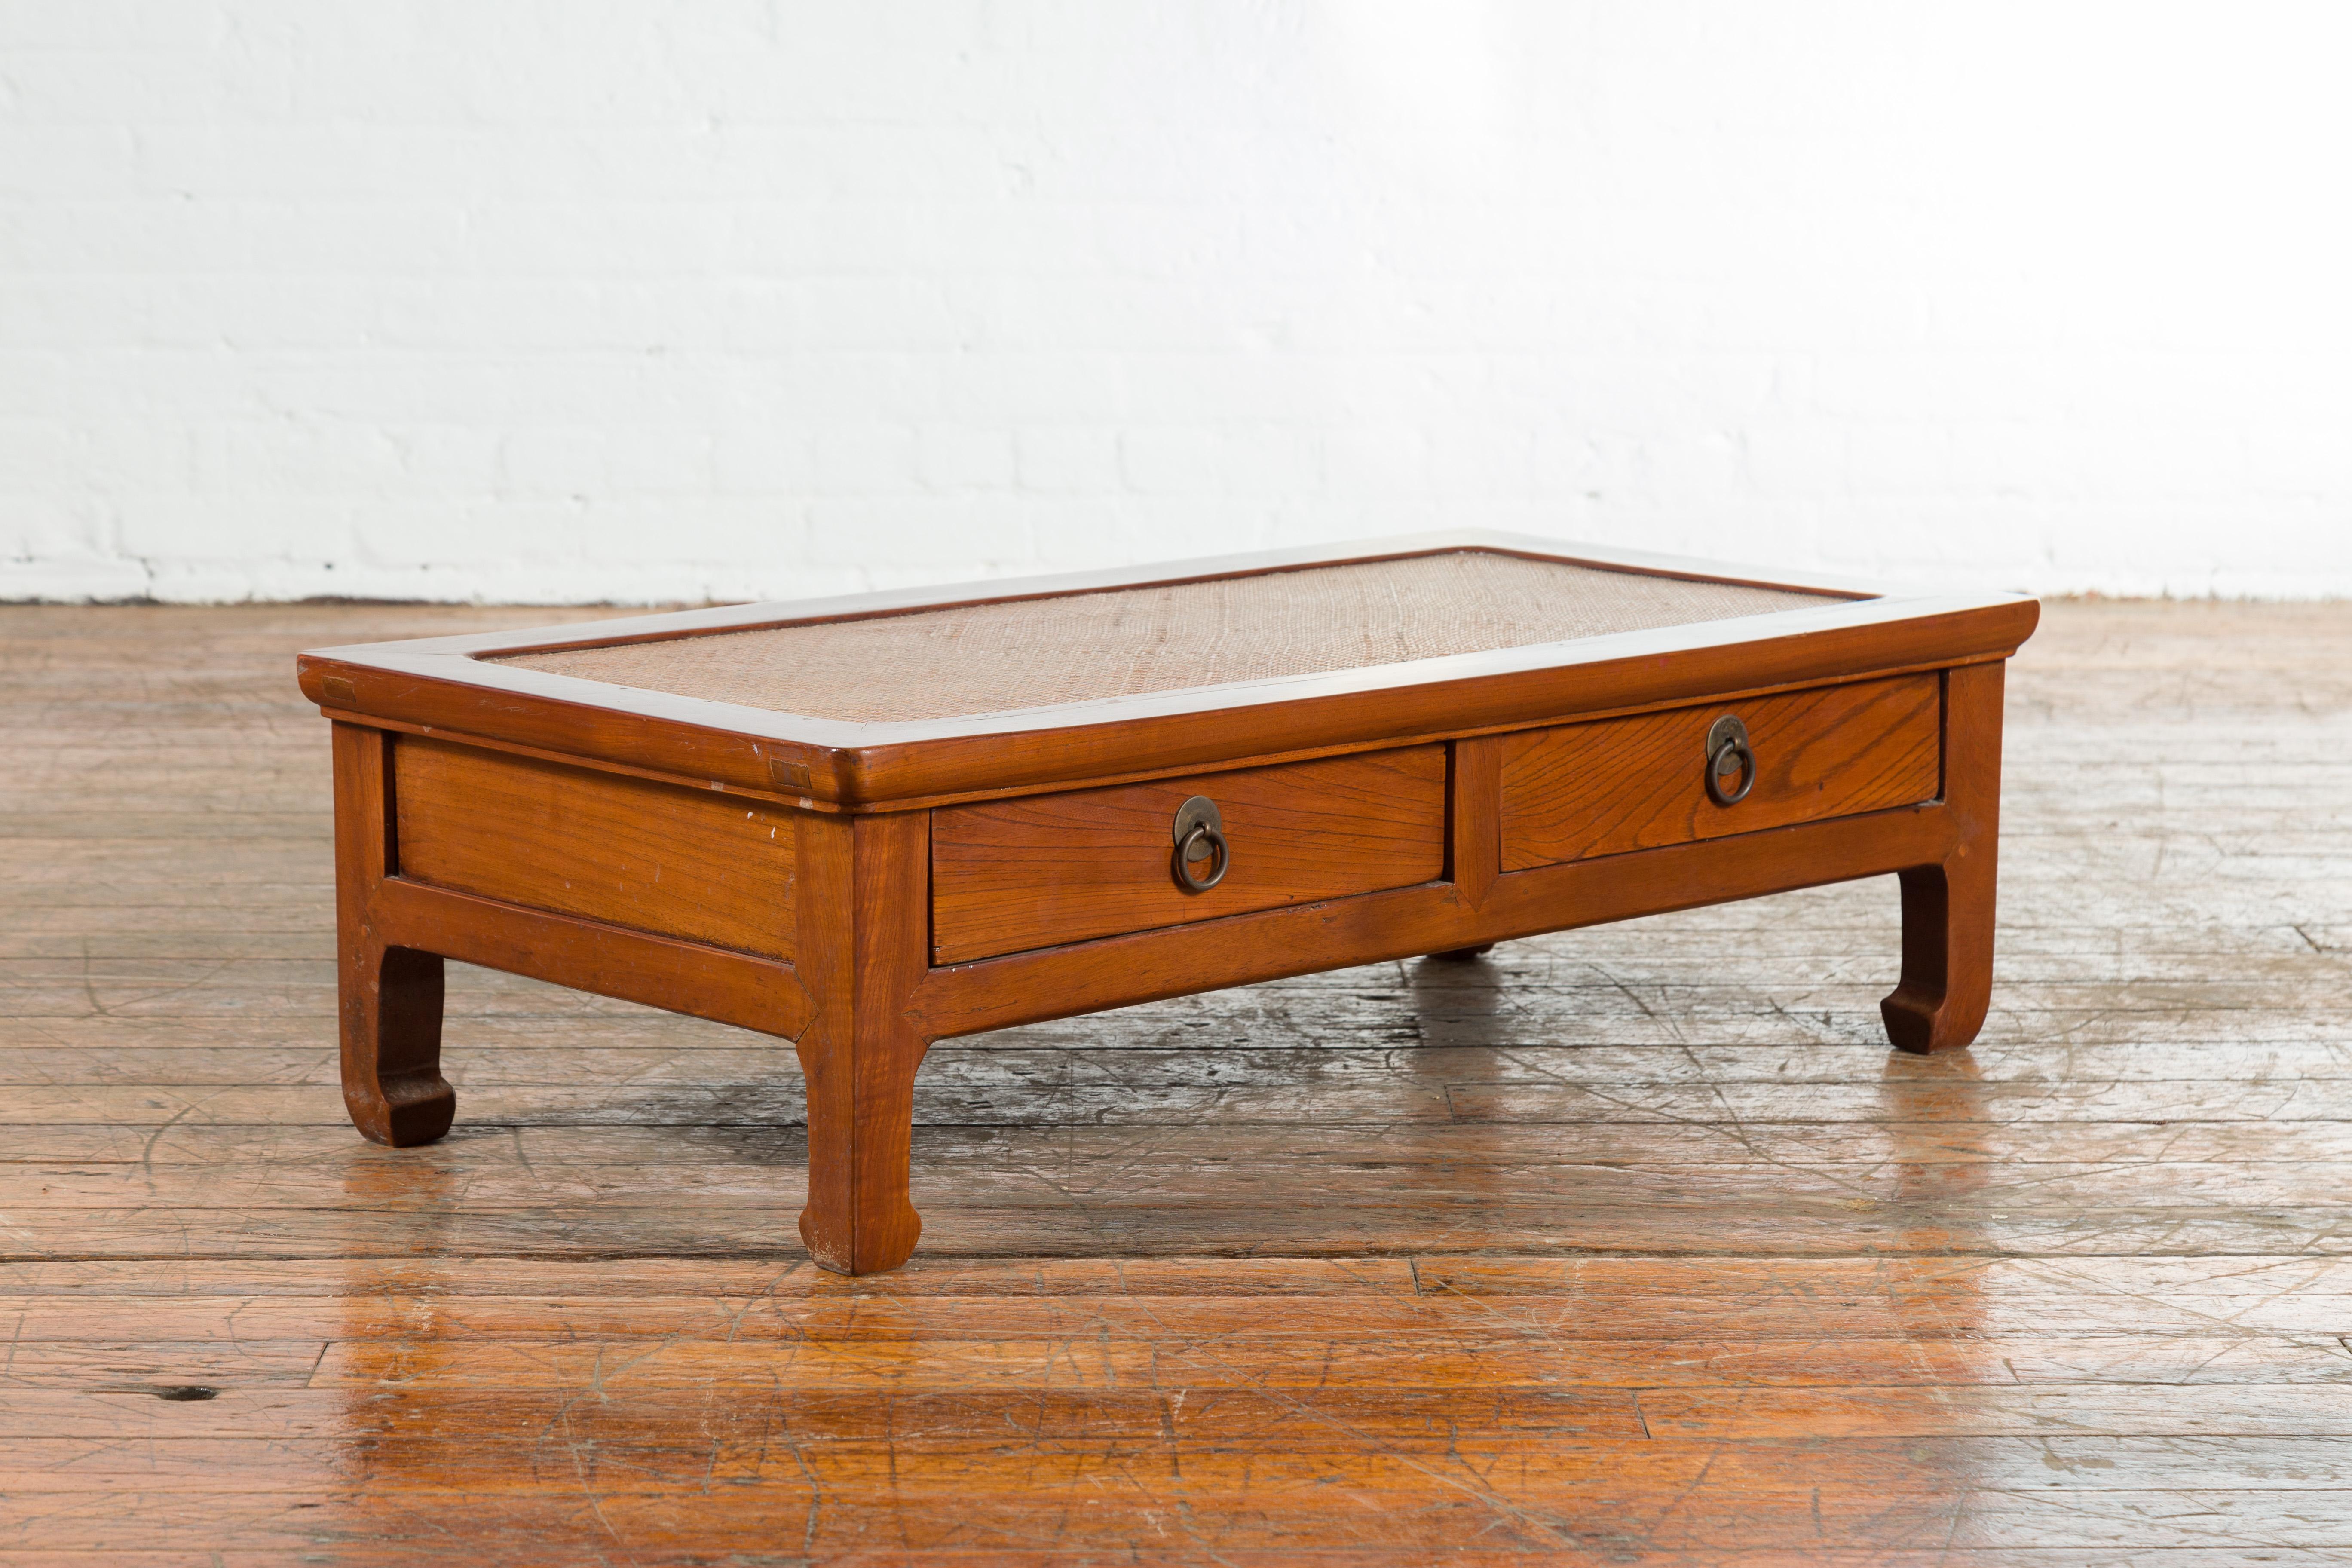 20th Century Chinese Vintage Low Elmwood Table with Rattan Inset Top and Two Drawers For Sale